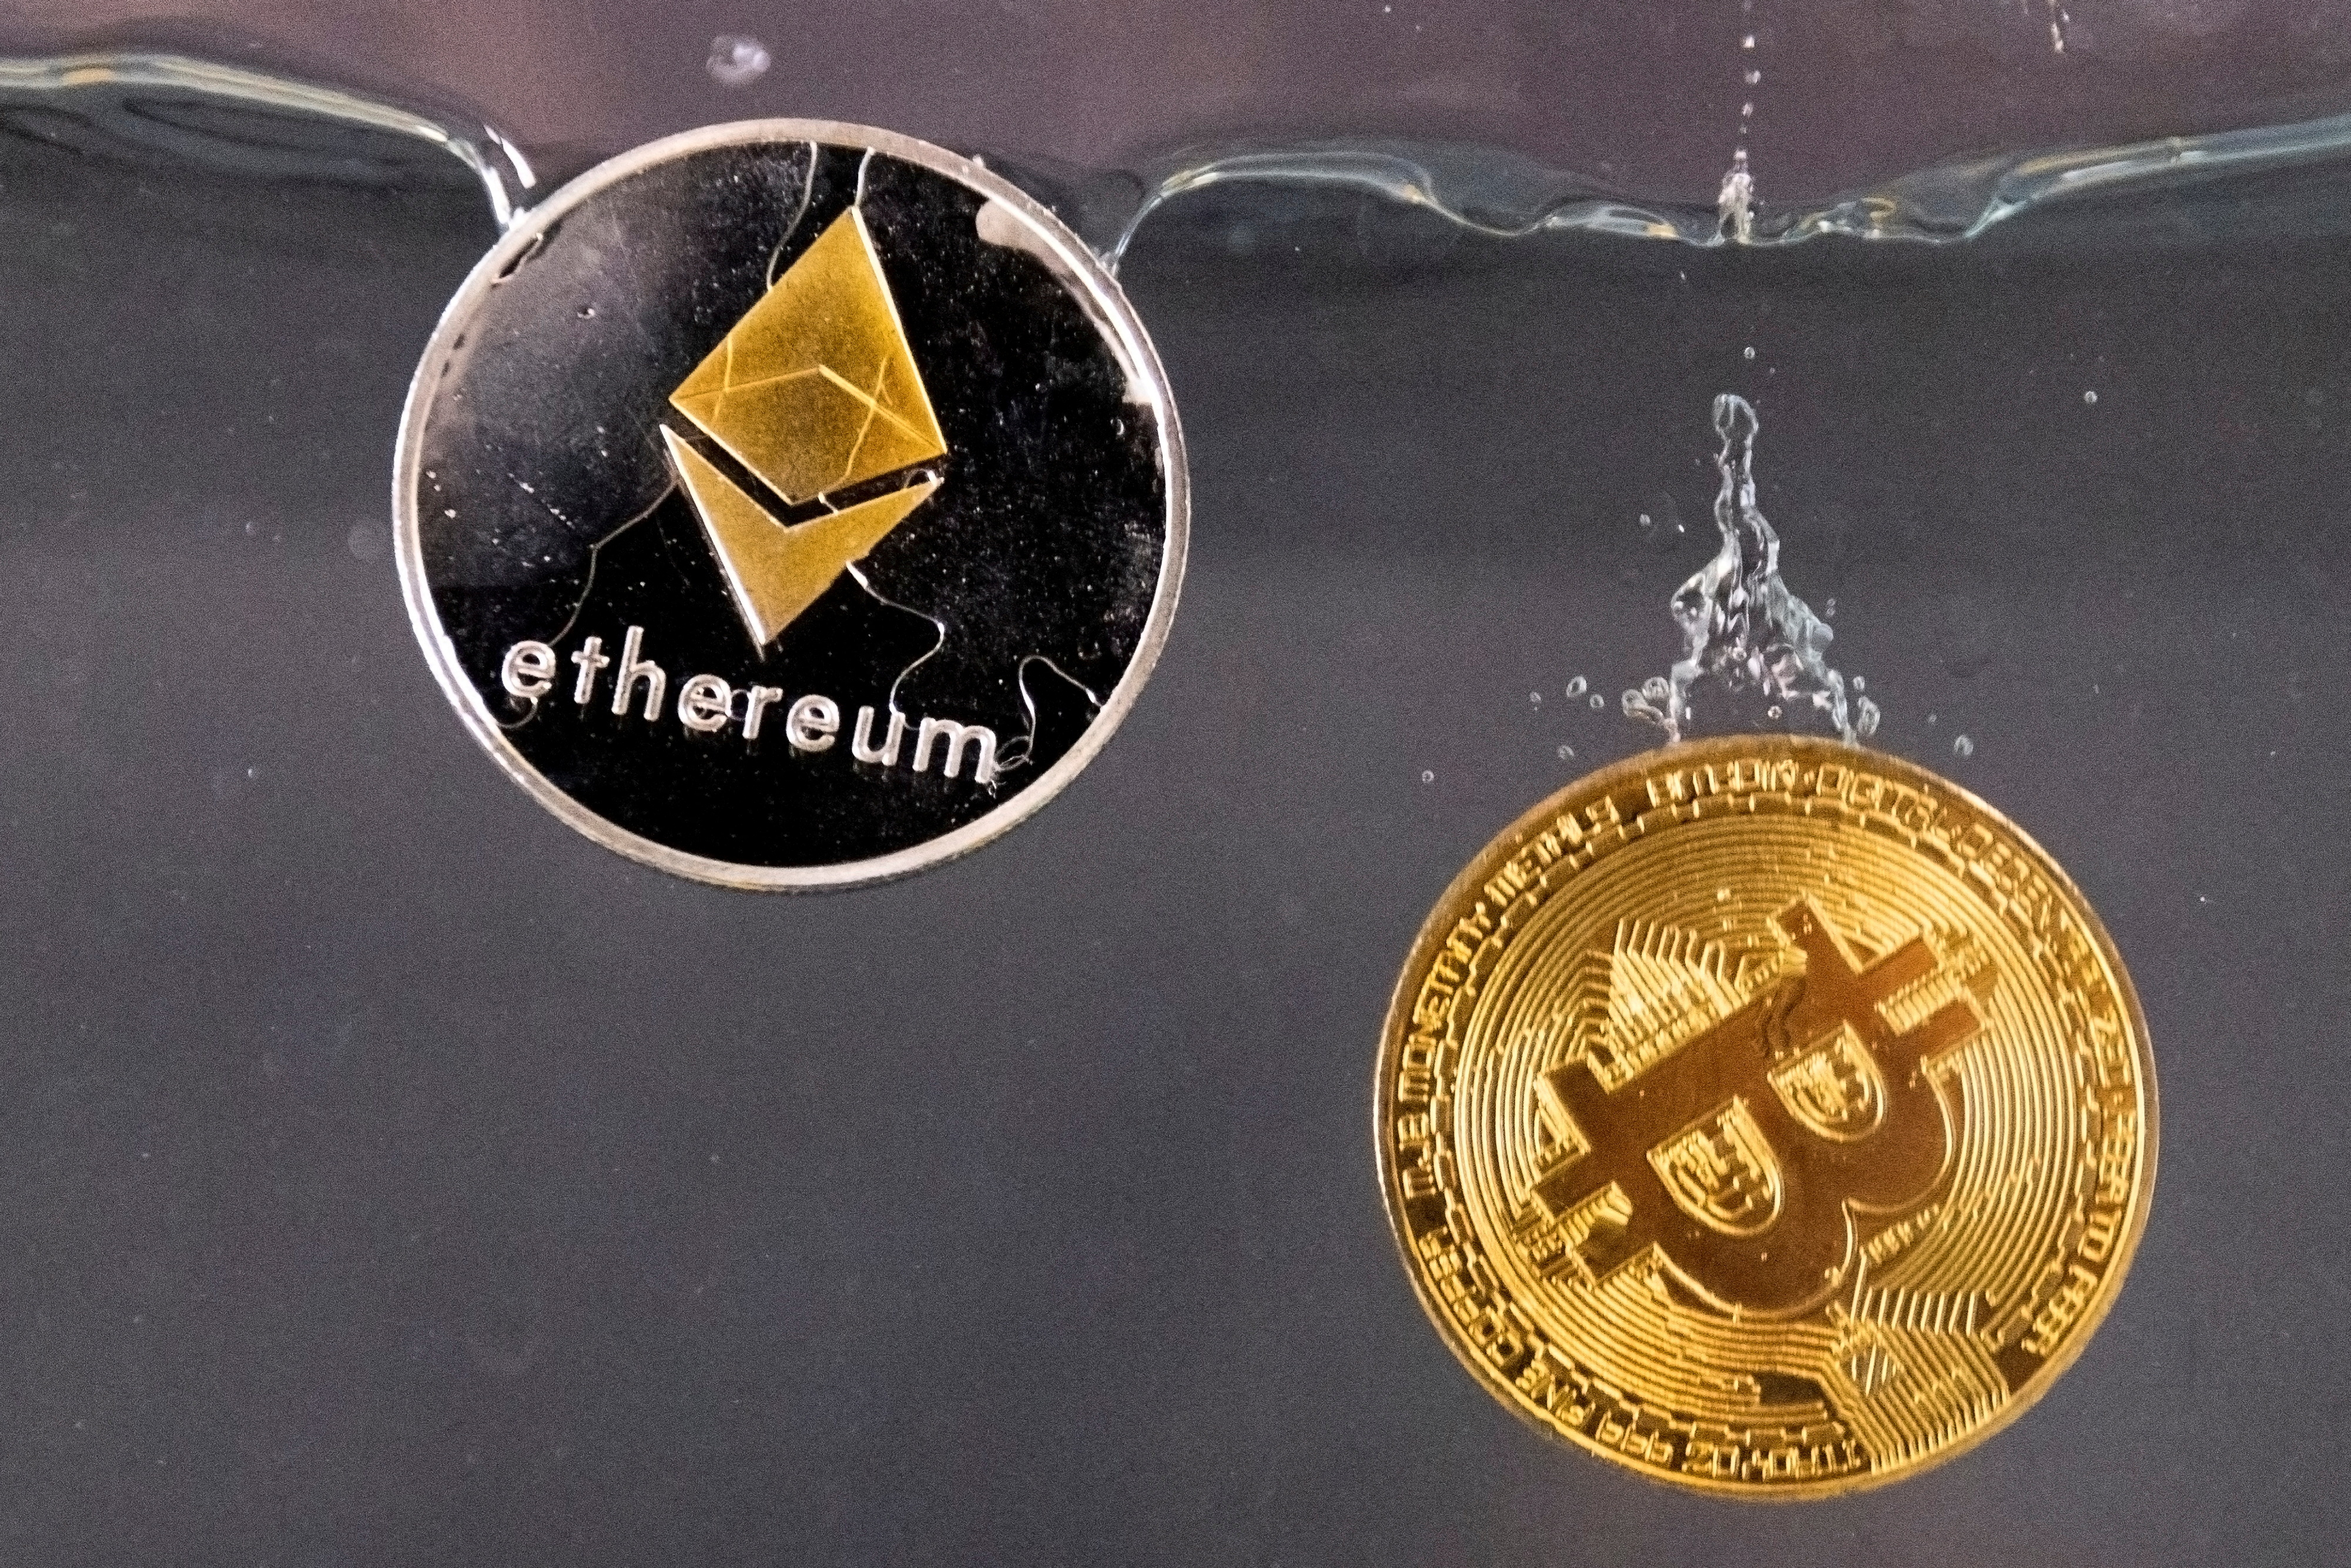 FILE PHOTO: Souvenir tokens representing cryptocurrency Bitcoin and the Ethereum network, with its native token ether, plunge into water in this illustration taken May 17, 2022. REUTERS/Dado Ruvic/File Photo